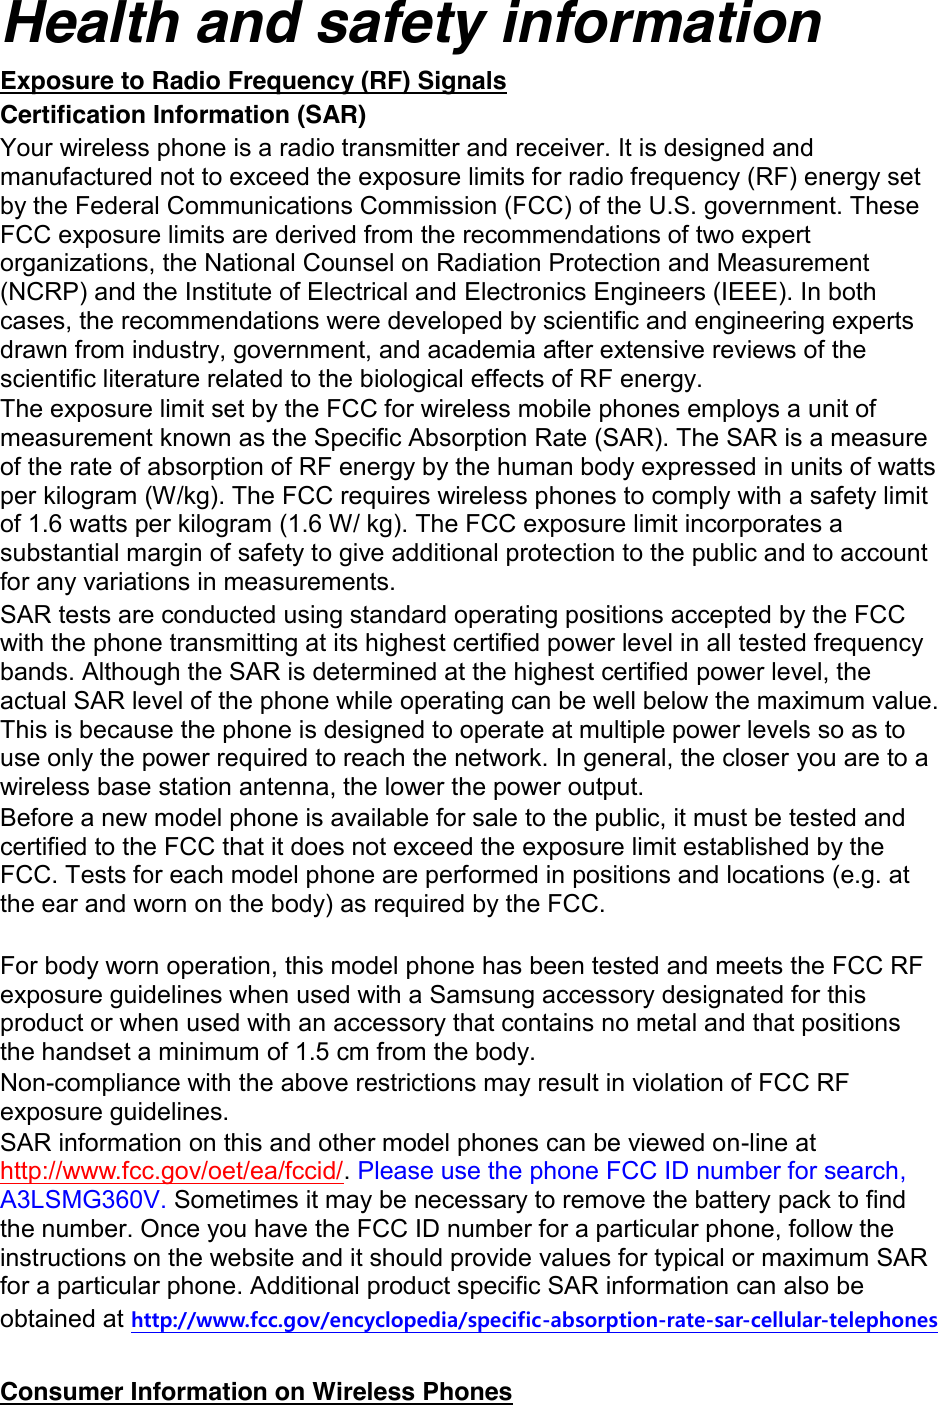 Health and safety information Exposure to Radio Frequency (RF) Signals Certification Information (SAR) Your wireless phone is a radio transmitter and receiver. It is designed and manufactured not to exceed the exposure limits for radio frequency (RF) energy set by the Federal Communications Commission (FCC) of the U.S. government. These FCC exposure limits are derived from the recommendations of two expert organizations, the National Counsel on Radiation Protection and Measurement (NCRP) and the Institute of Electrical and Electronics Engineers (IEEE). In both cases, the recommendations were developed by scientific and engineering experts drawn from industry, government, and academia after extensive reviews of the scientific literature related to the biological effects of RF energy. The exposure limit set by the FCC for wireless mobile phones employs a unit of measurement known as the Specific Absorption Rate (SAR). The SAR is a measure of the rate of absorption of RF energy by the human body expressed in units of watts per kilogram (W/kg). The FCC requires wireless phones to comply with a safety limit of 1.6 watts per kilogram (1.6 W/ kg). The FCC exposure limit incorporates a substantial margin of safety to give additional protection to the public and to account for any variations in measurements. SAR tests are conducted using standard operating positions accepted by the FCC with the phone transmitting at its highest certified power level in all tested frequency bands. Although the SAR is determined at the highest certified power level, the actual SAR level of the phone while operating can be well below the maximum value. This is because the phone is designed to operate at multiple power levels so as to use only the power required to reach the network. In general, the closer you are to a wireless base station antenna, the lower the power output. Before a new model phone is available for sale to the public, it must be tested and certified to the FCC that it does not exceed the exposure limit established by the FCC. Tests for each model phone are performed in positions and locations (e.g. at the ear and worn on the body) as required by the FCC.      For body worn operation, this model phone has been tested and meets the FCC RF exposure guidelines when used with a Samsung accessory designated for this product or when used with an accessory that contains no metal and that positions the handset a minimum of 1.5 cm from the body.   Non-compliance with the above restrictions may result in violation of FCC RF exposure guidelines. SAR information on this and other model phones can be viewed on-line at http://www.fcc.gov/oet/ea/fccid/. Please use the phone FCC ID number for search, A3LSMG360V. Sometimes it may be necessary to remove the battery pack to find the number. Once you have the FCC ID number for a particular phone, follow the instructions on the website and it should provide values for typical or maximum SAR for a particular phone. Additional product specific SAR information can also be obtained at http://www.fcc.gov/encyclopedia/specific-absorption-rate-sar-cellular-telephones  Consumer Information on Wireless Phones 